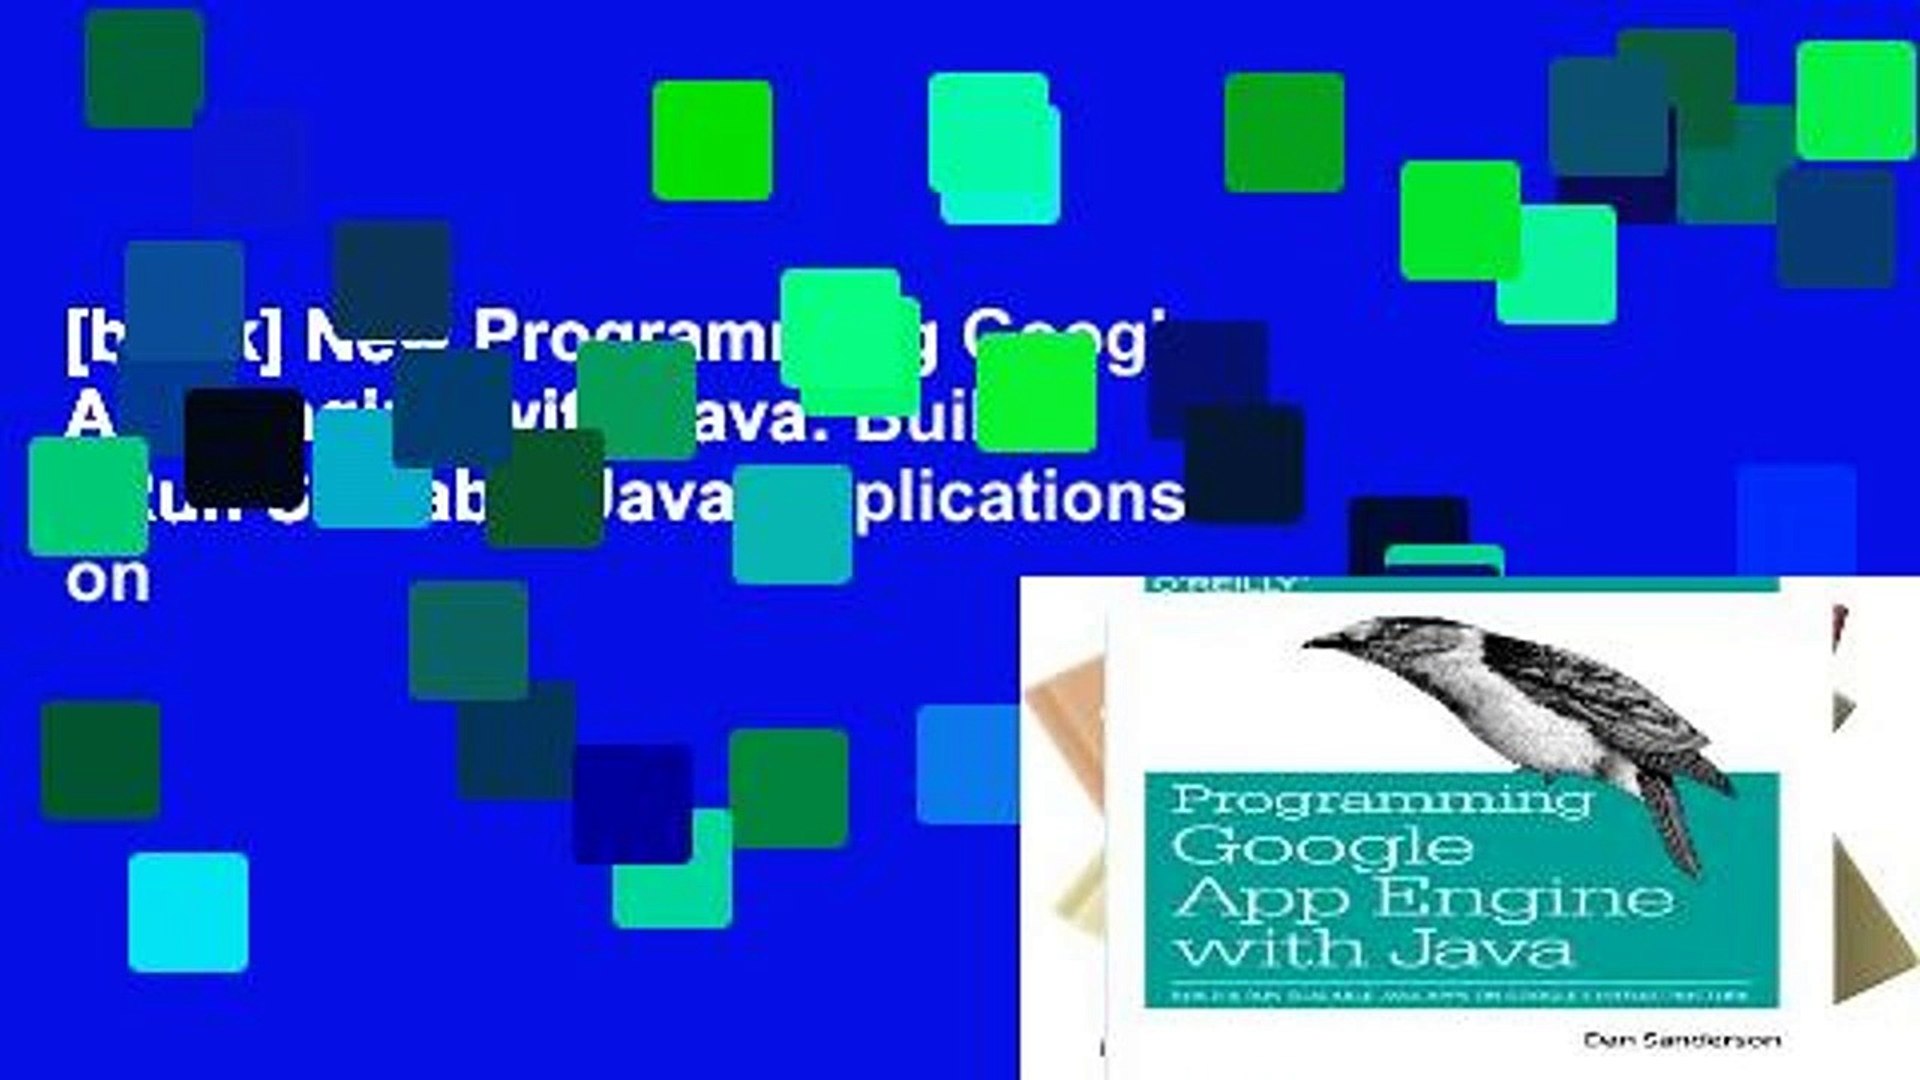 [book] New Programming Google App Engine with Java: Build   Run Scalable Java Applications on